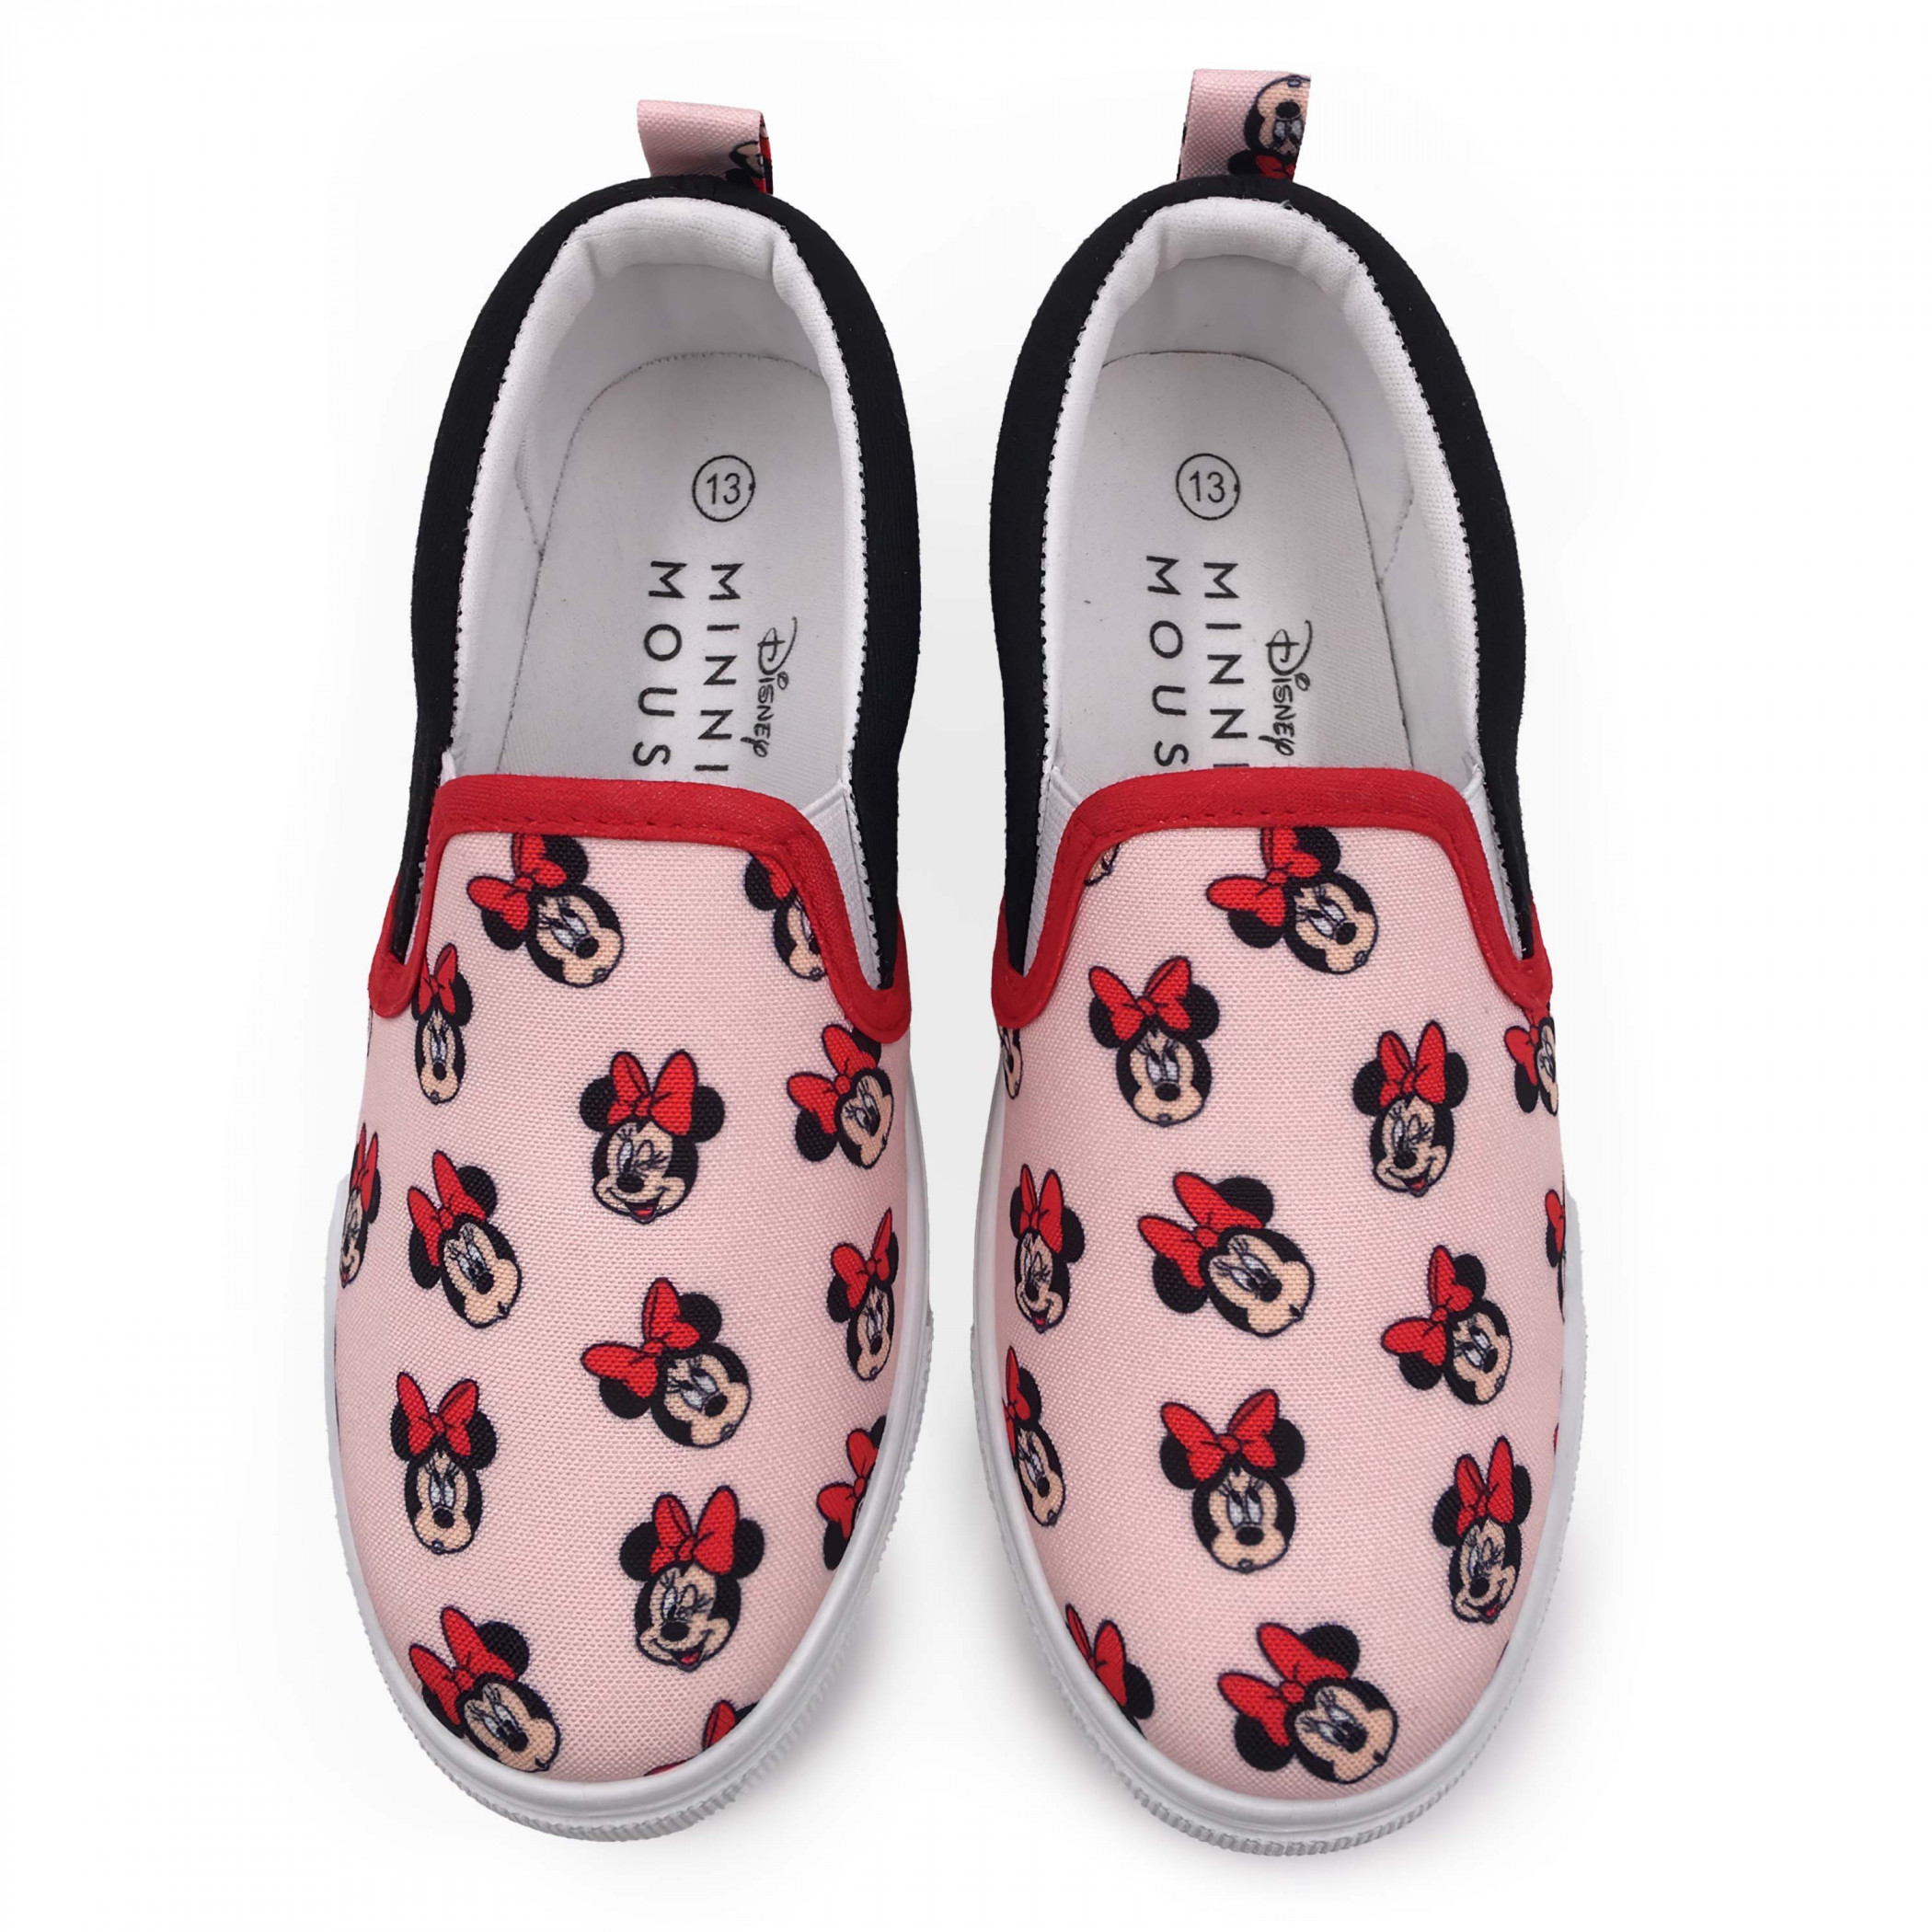 Minnie Mouse Expressions Girl's Slip-On Shoes